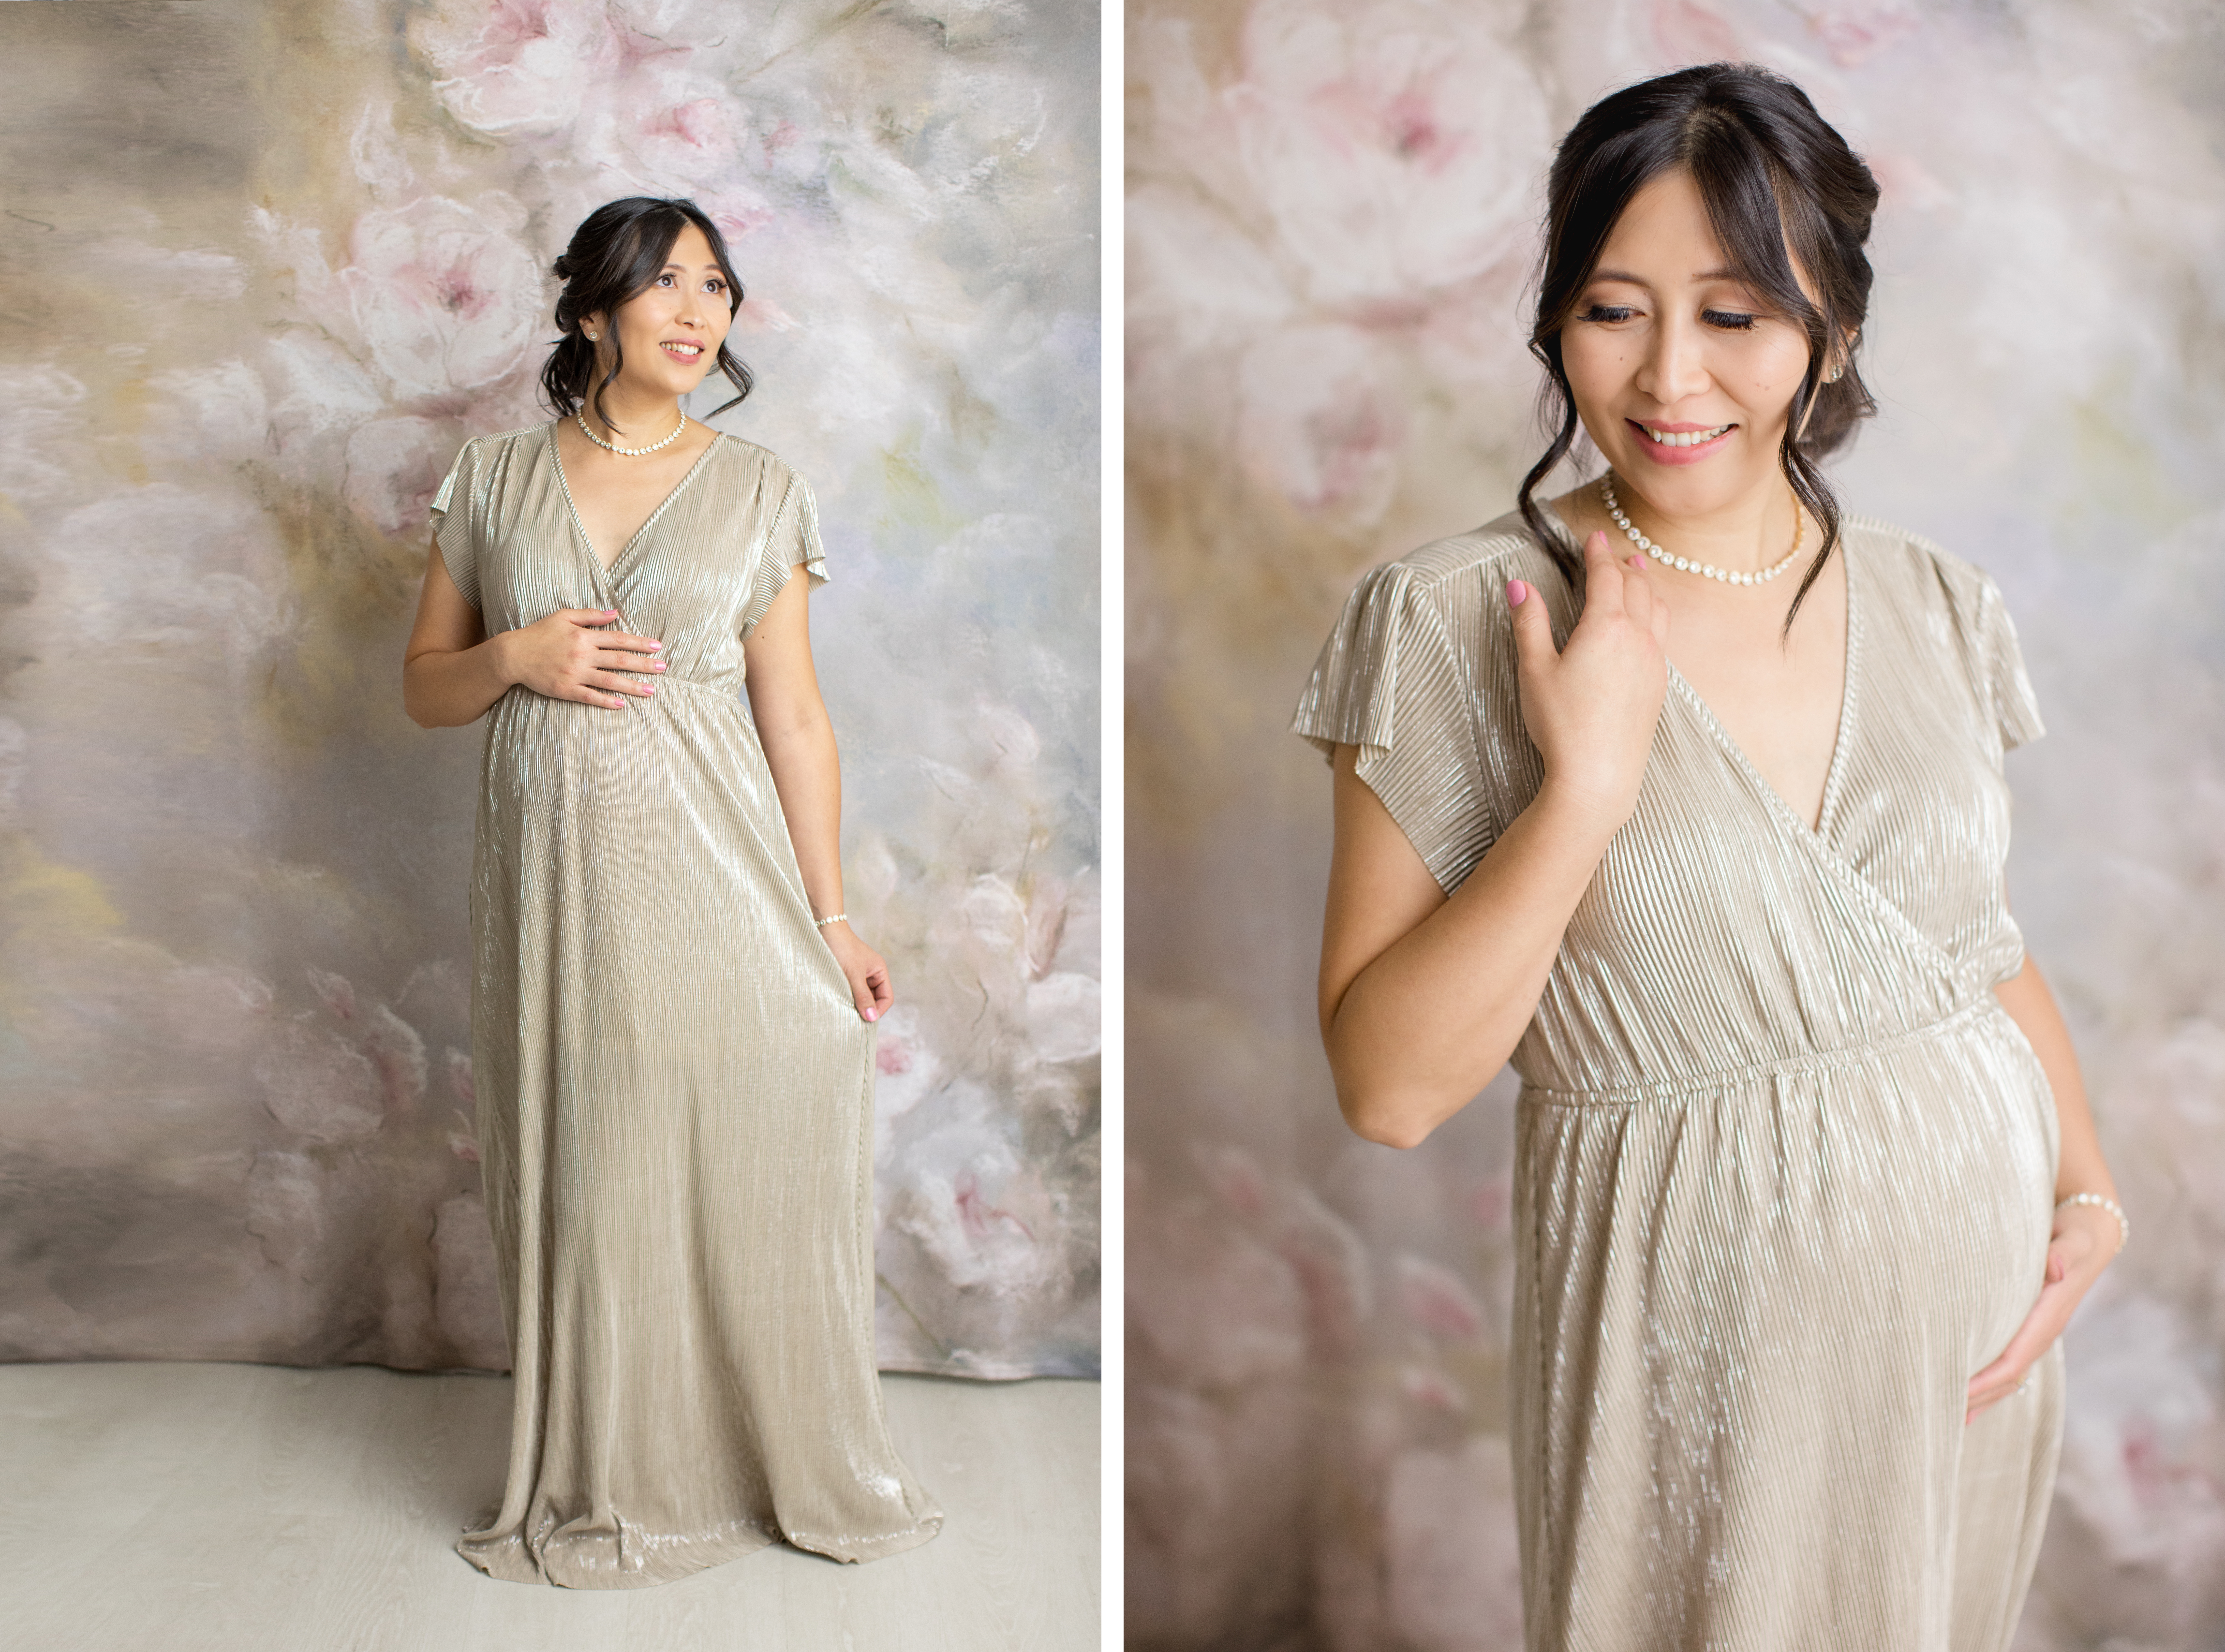 Baltic born athena dress in gold on floral backdrop, maternity photos.